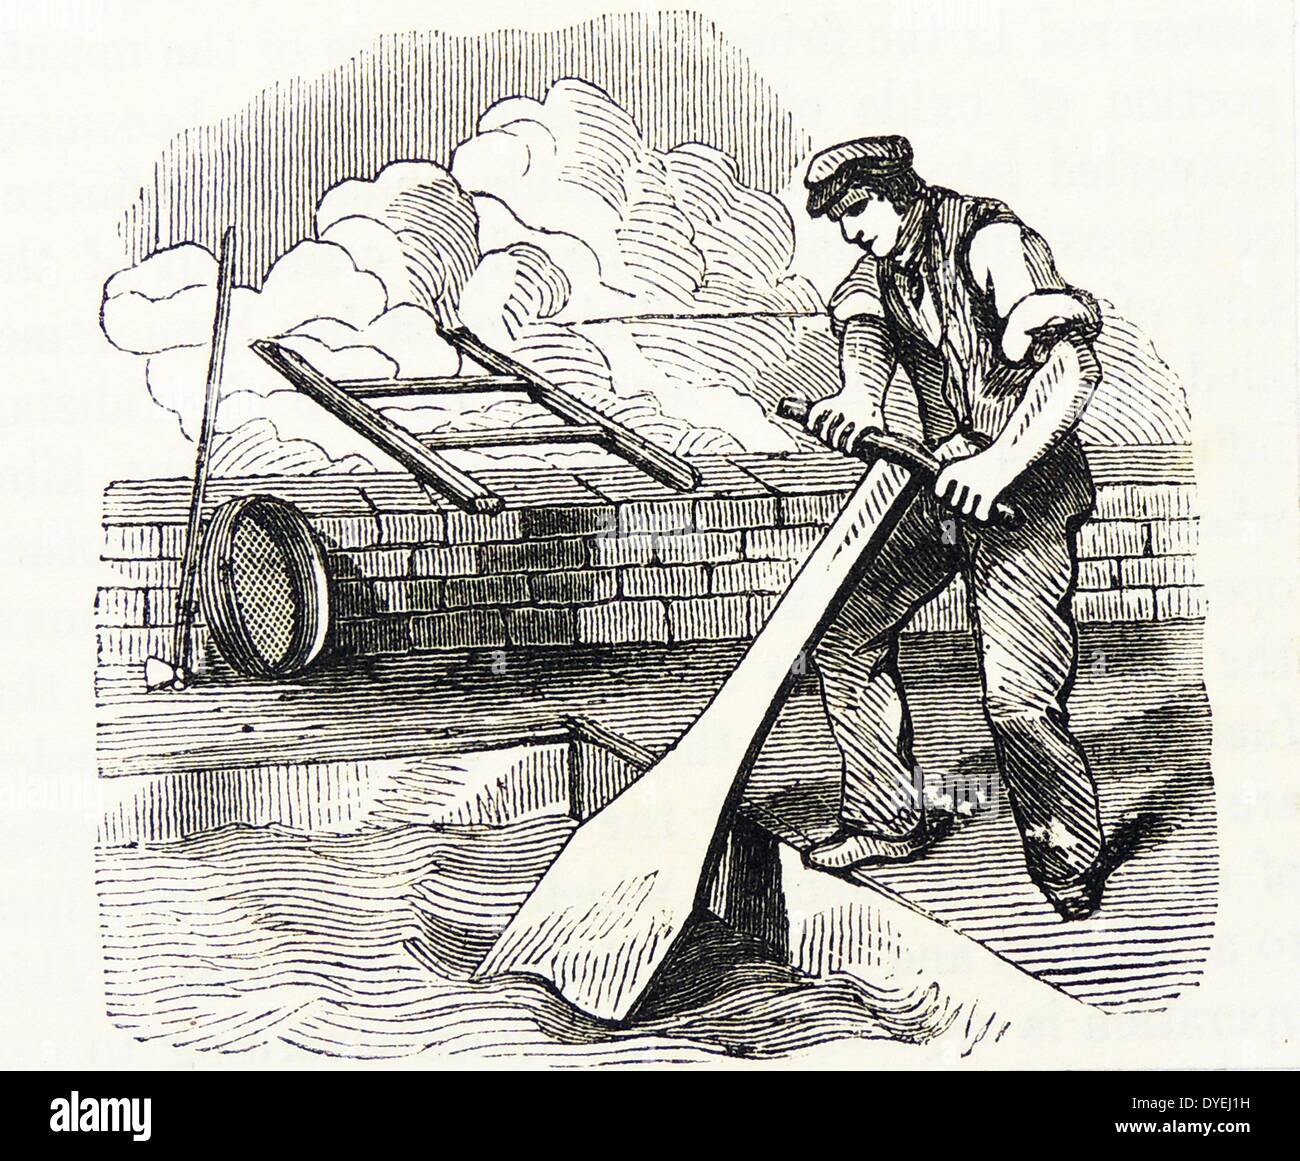 Pottery works, Staffordshire, England. Mixing clay slip with a blunger. Engraving, London, 1866. Stock Photo